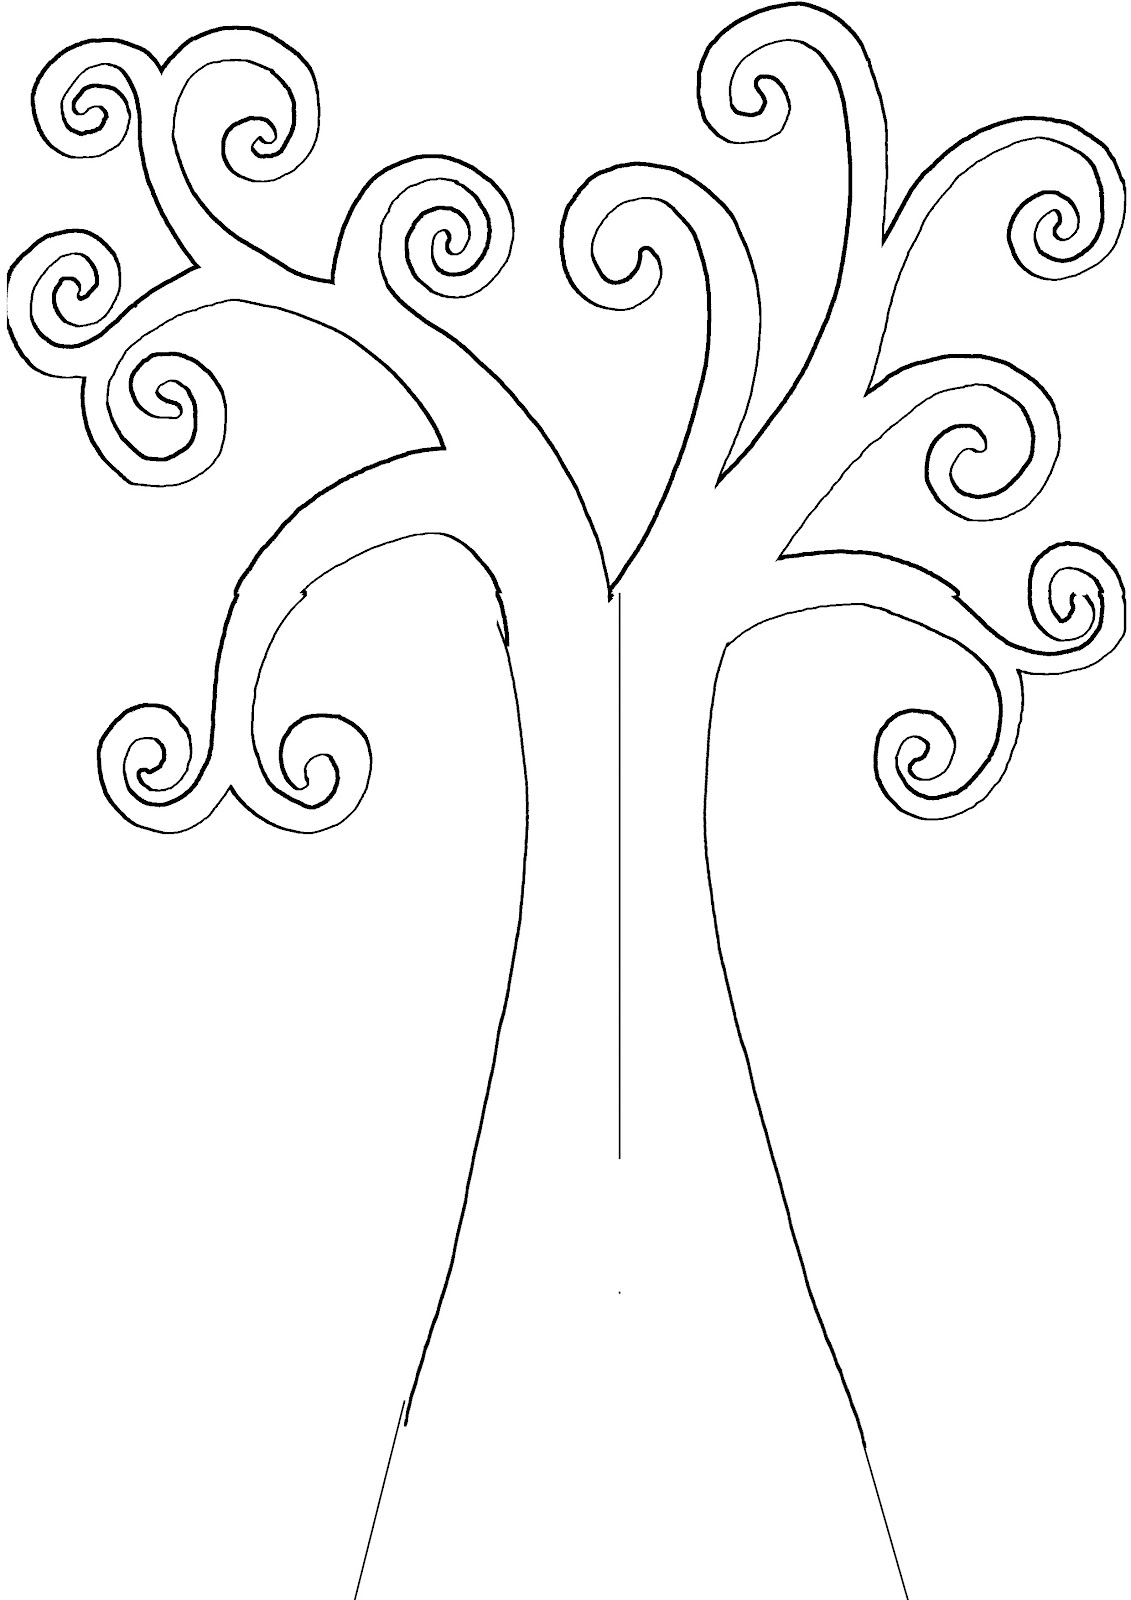 Free Leafless Tree Outline Printable Download Free Leafless Tree 